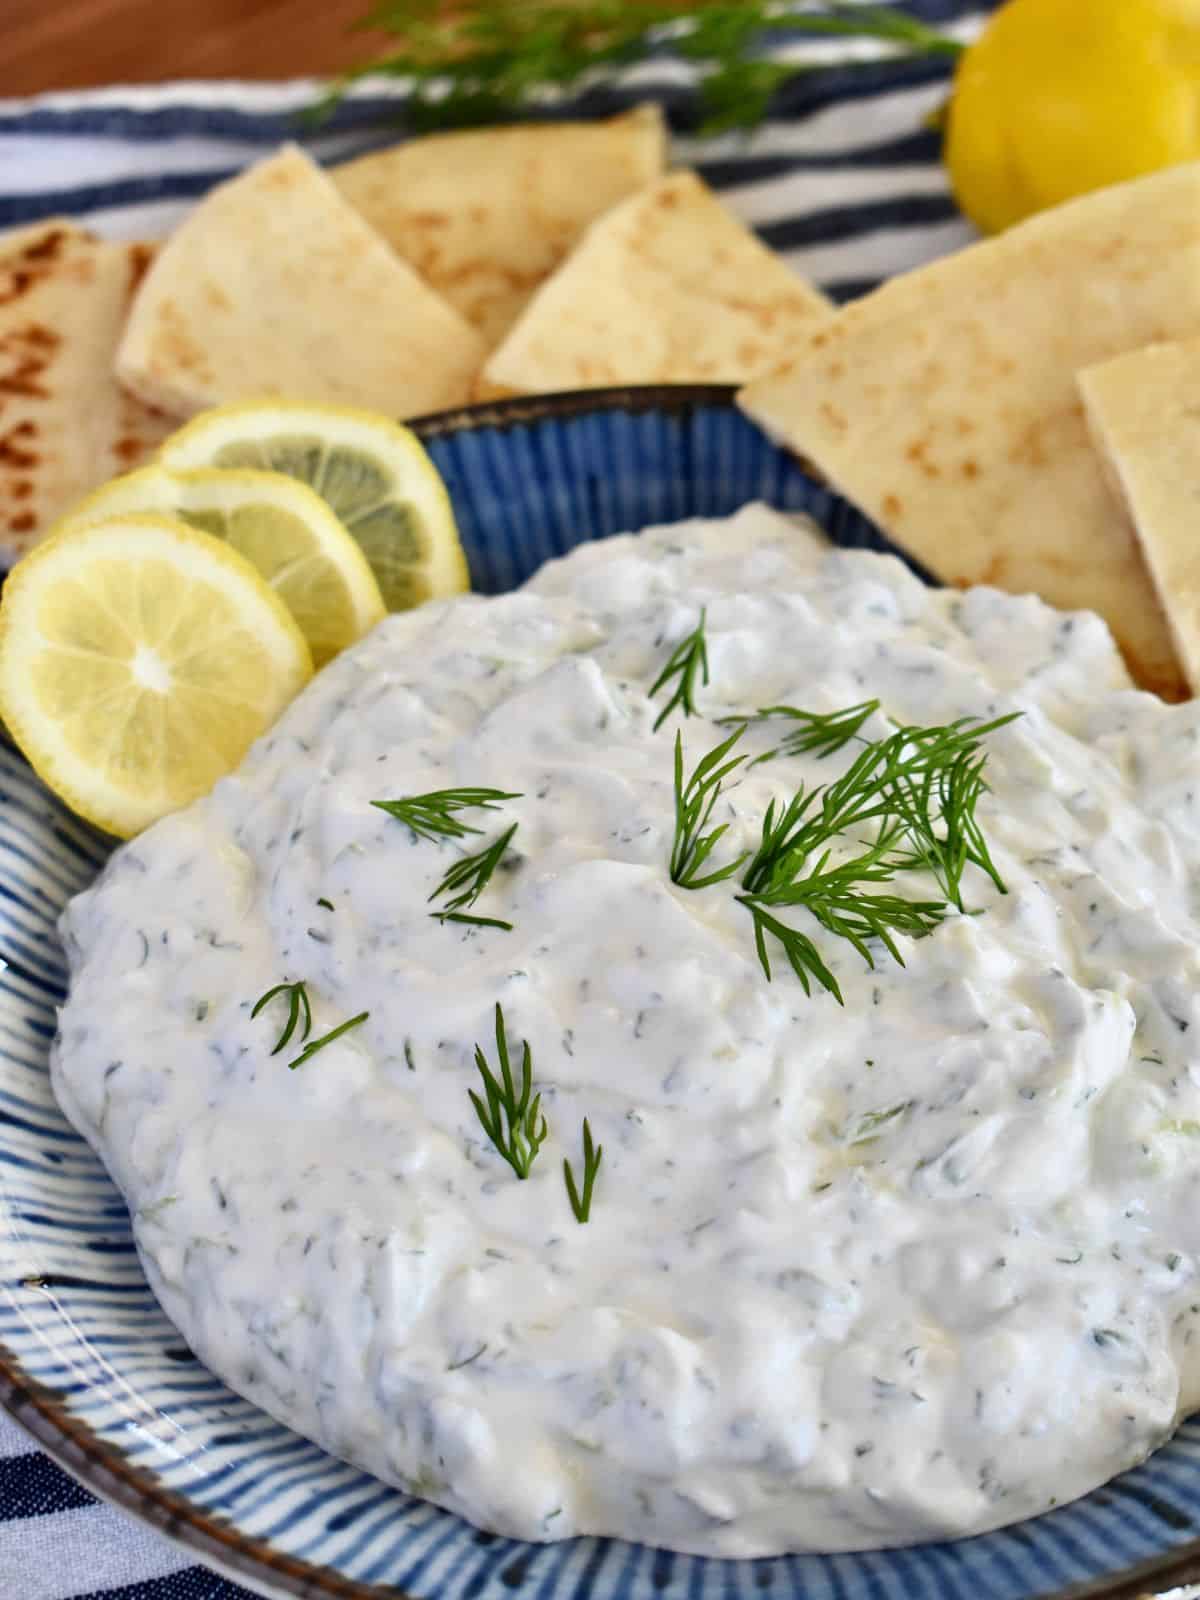 Tzatziki Sauce with sour cream and Greek yogurt is a creamy and delicious dip made with simple ingredients. This creamy tzatziki sauce is extra smooth and is perfect for dipping pita chips or fresh veggies. 